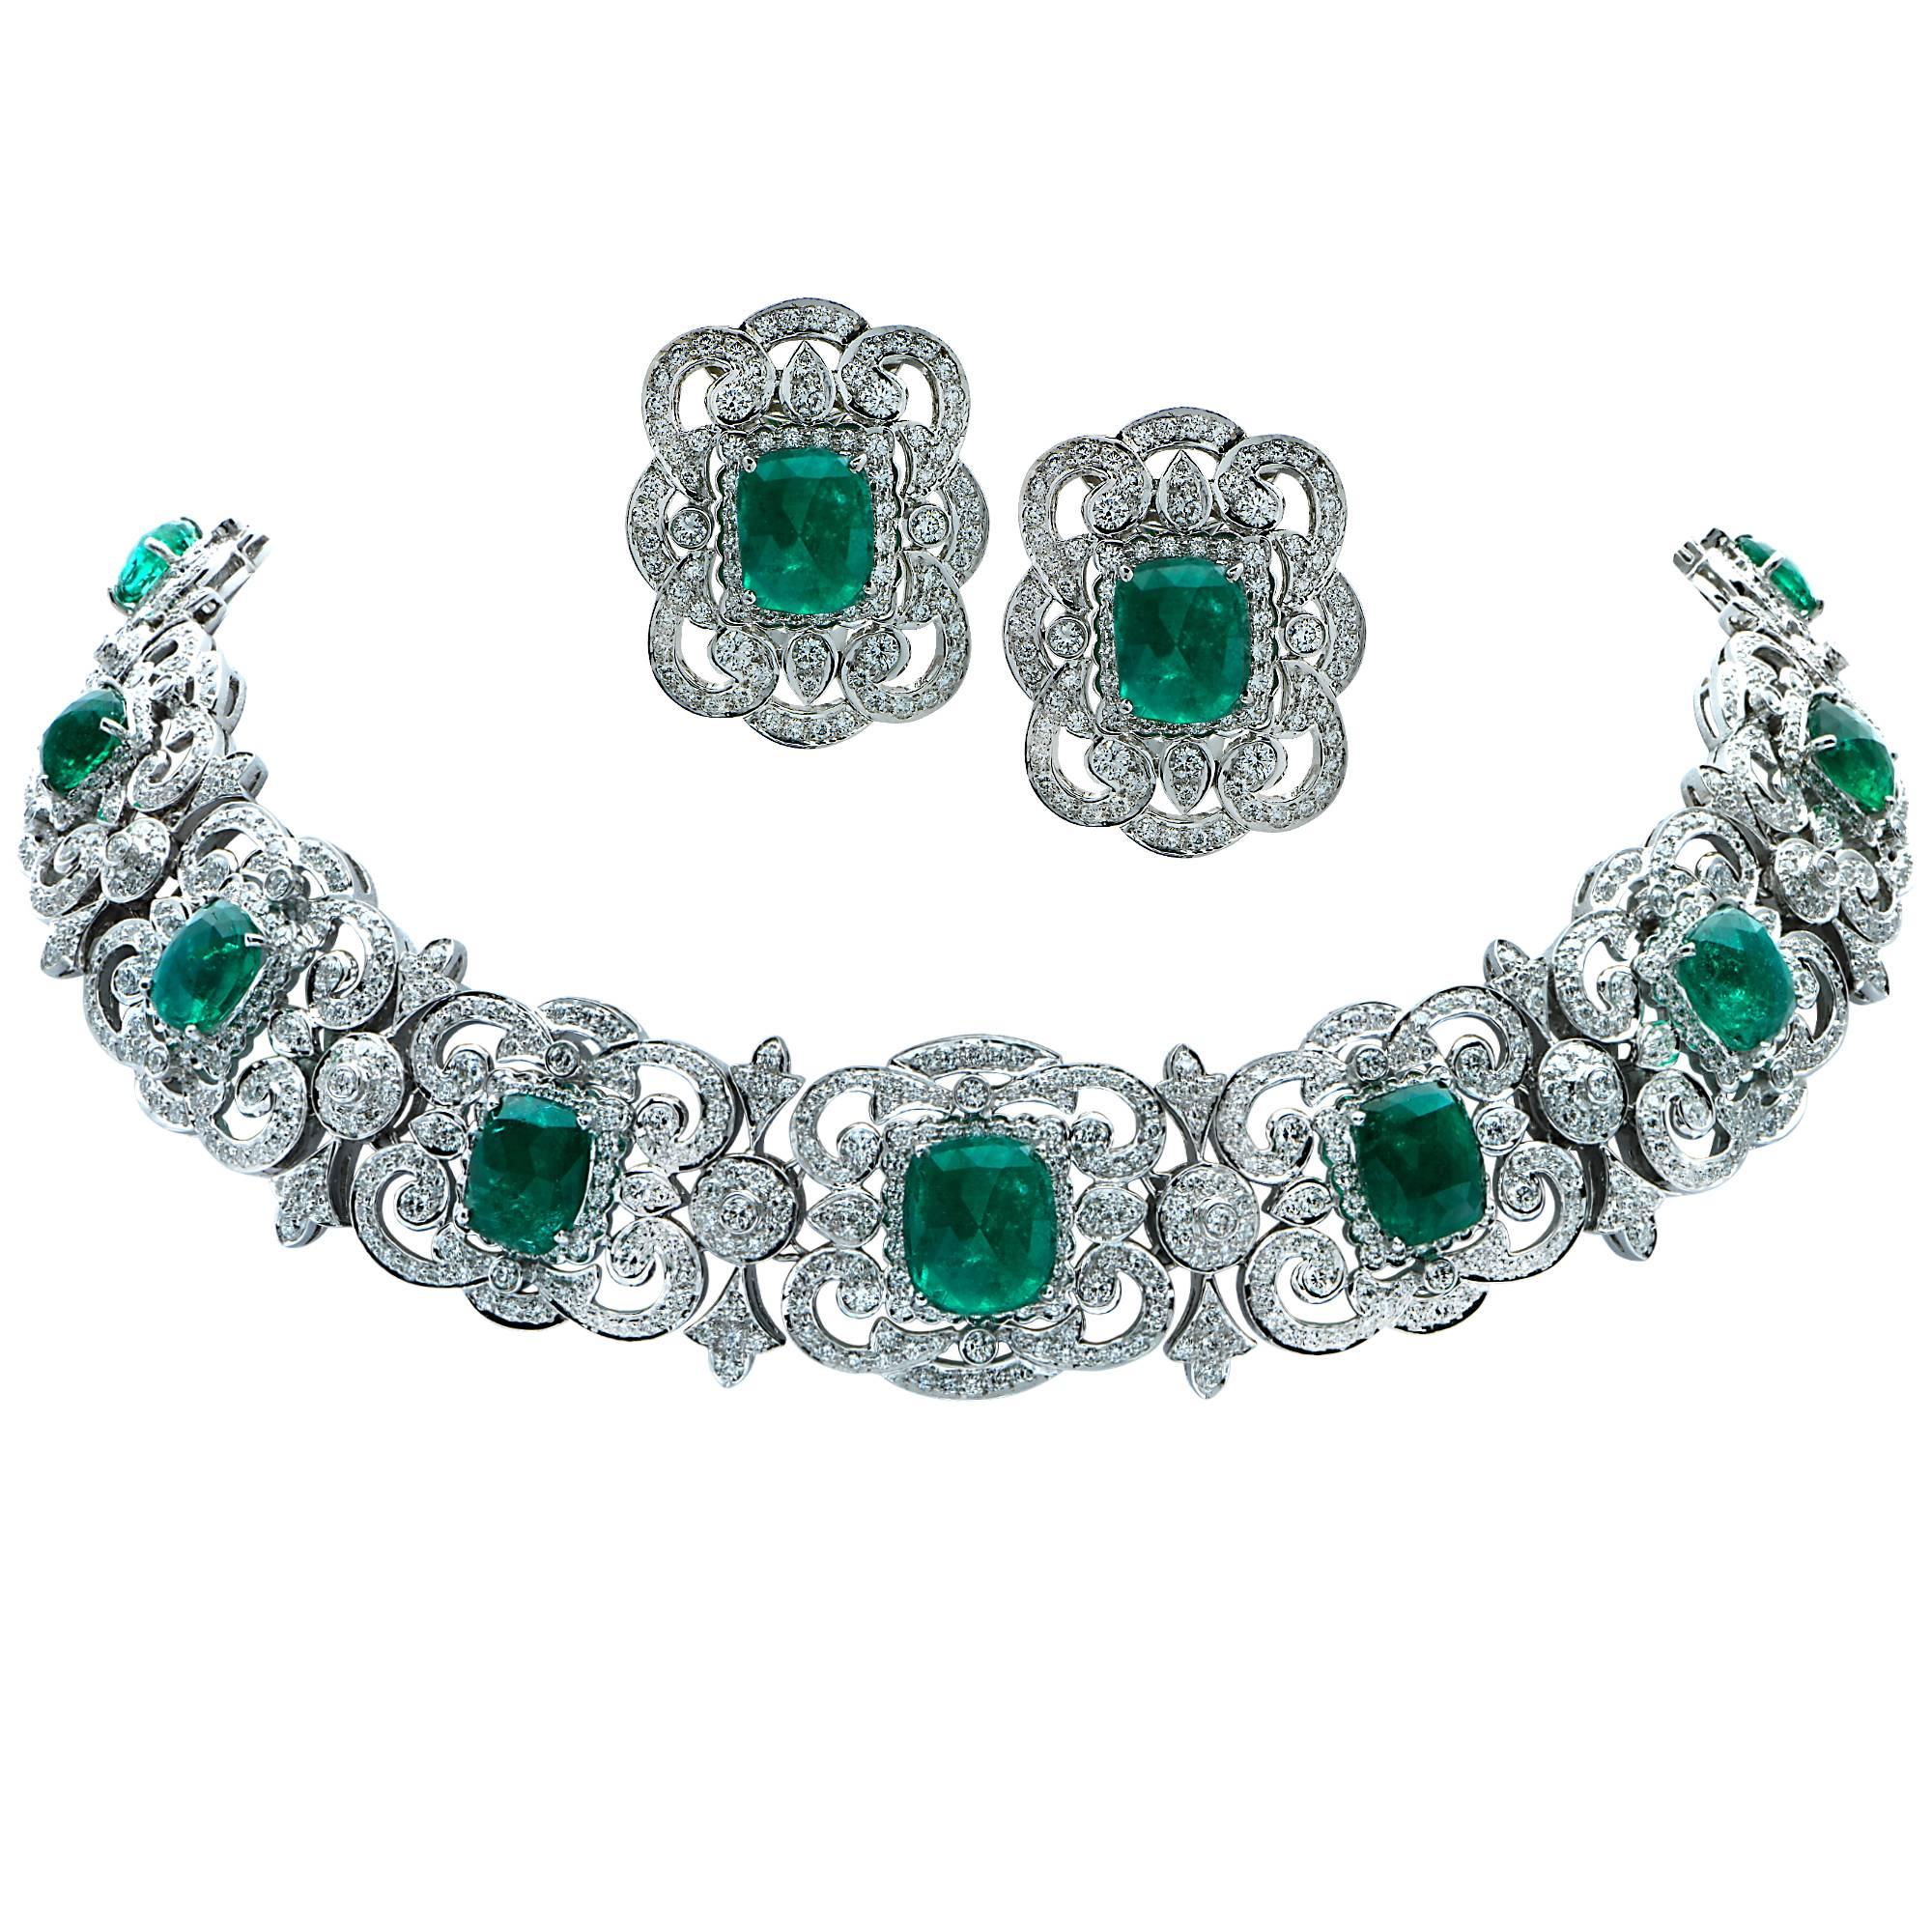 Captivating Emerald and Diamond Earrings and Necklace 18 Karat White Gold Set